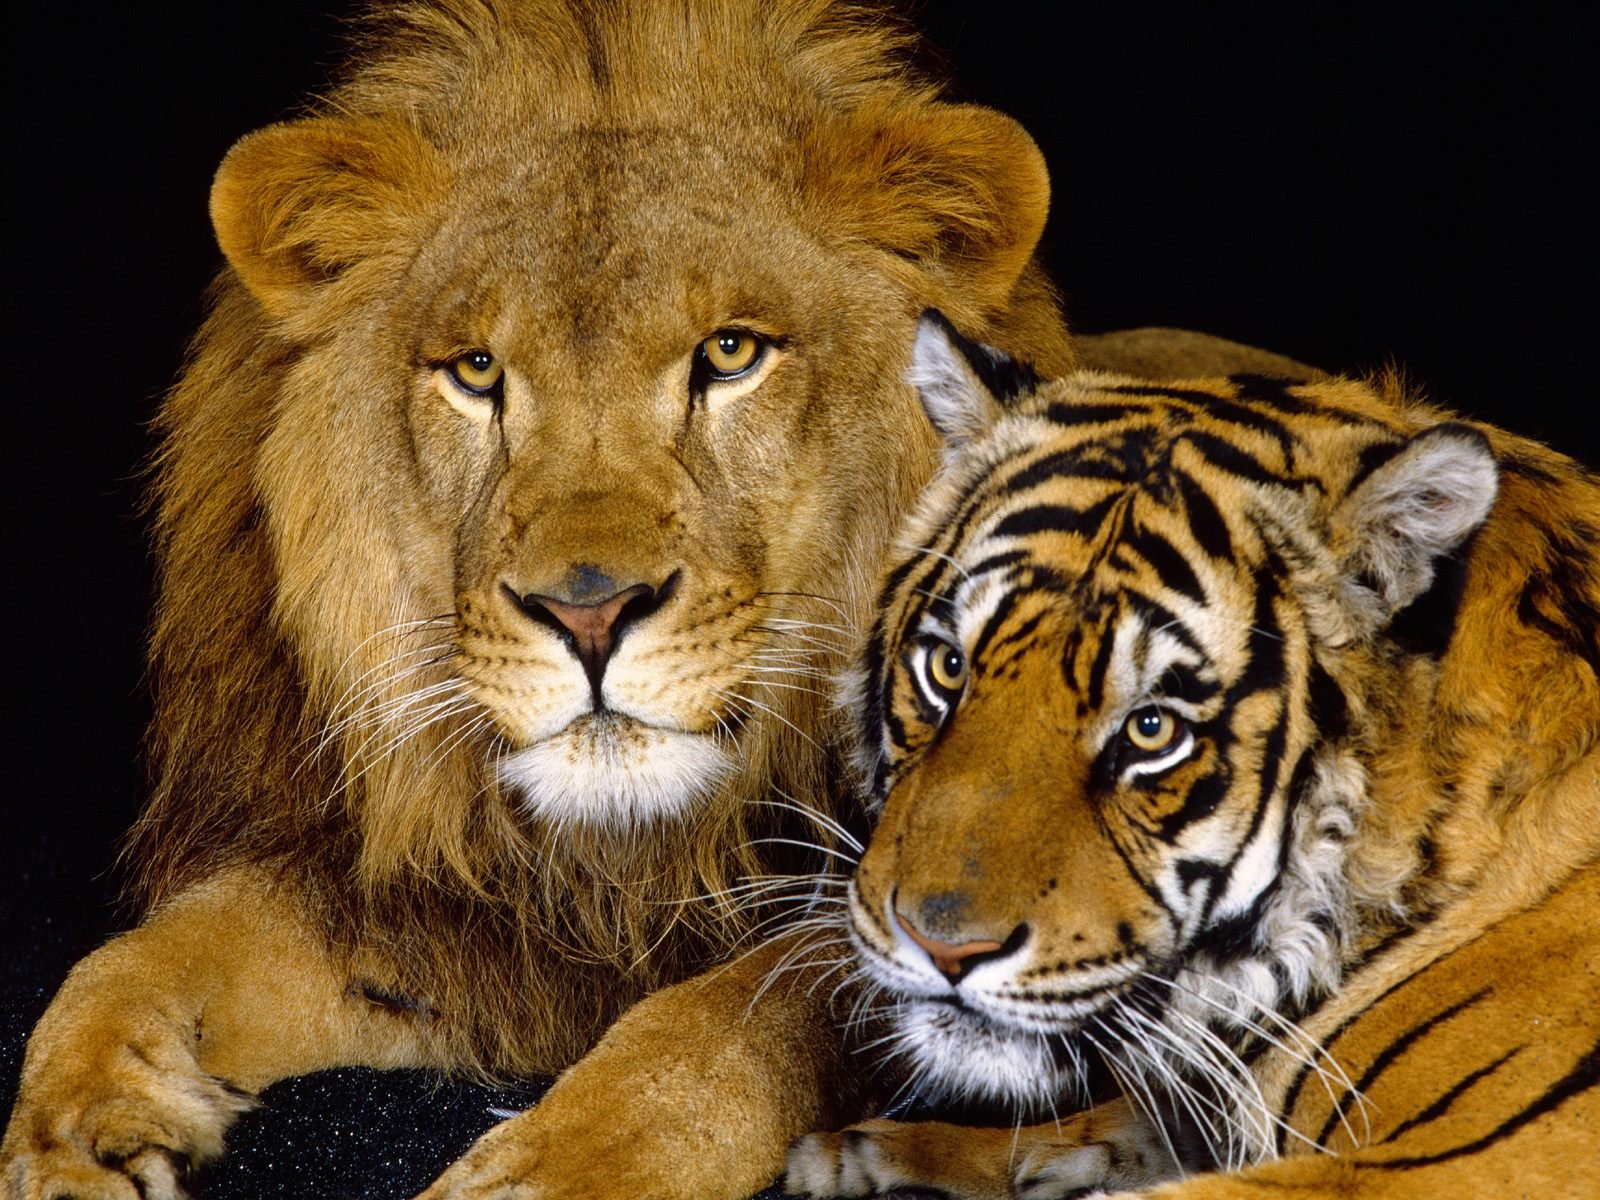  Animals Wallpapers The best Animal wallpapers You ever had seen 1600x1200